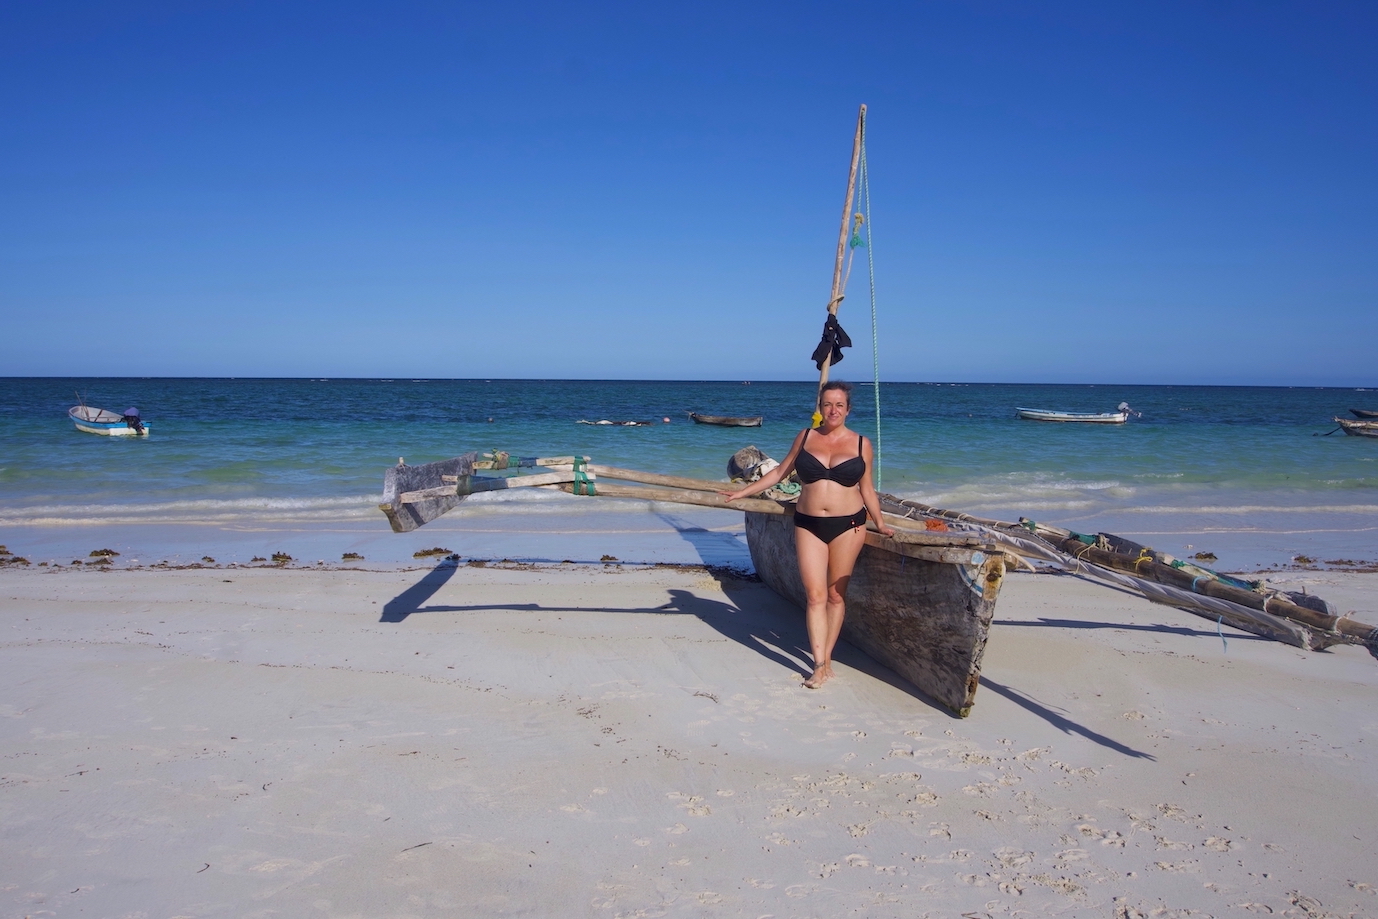 Pilar leaning on a two winged boat in Diani beach with sea and some other boats on the background